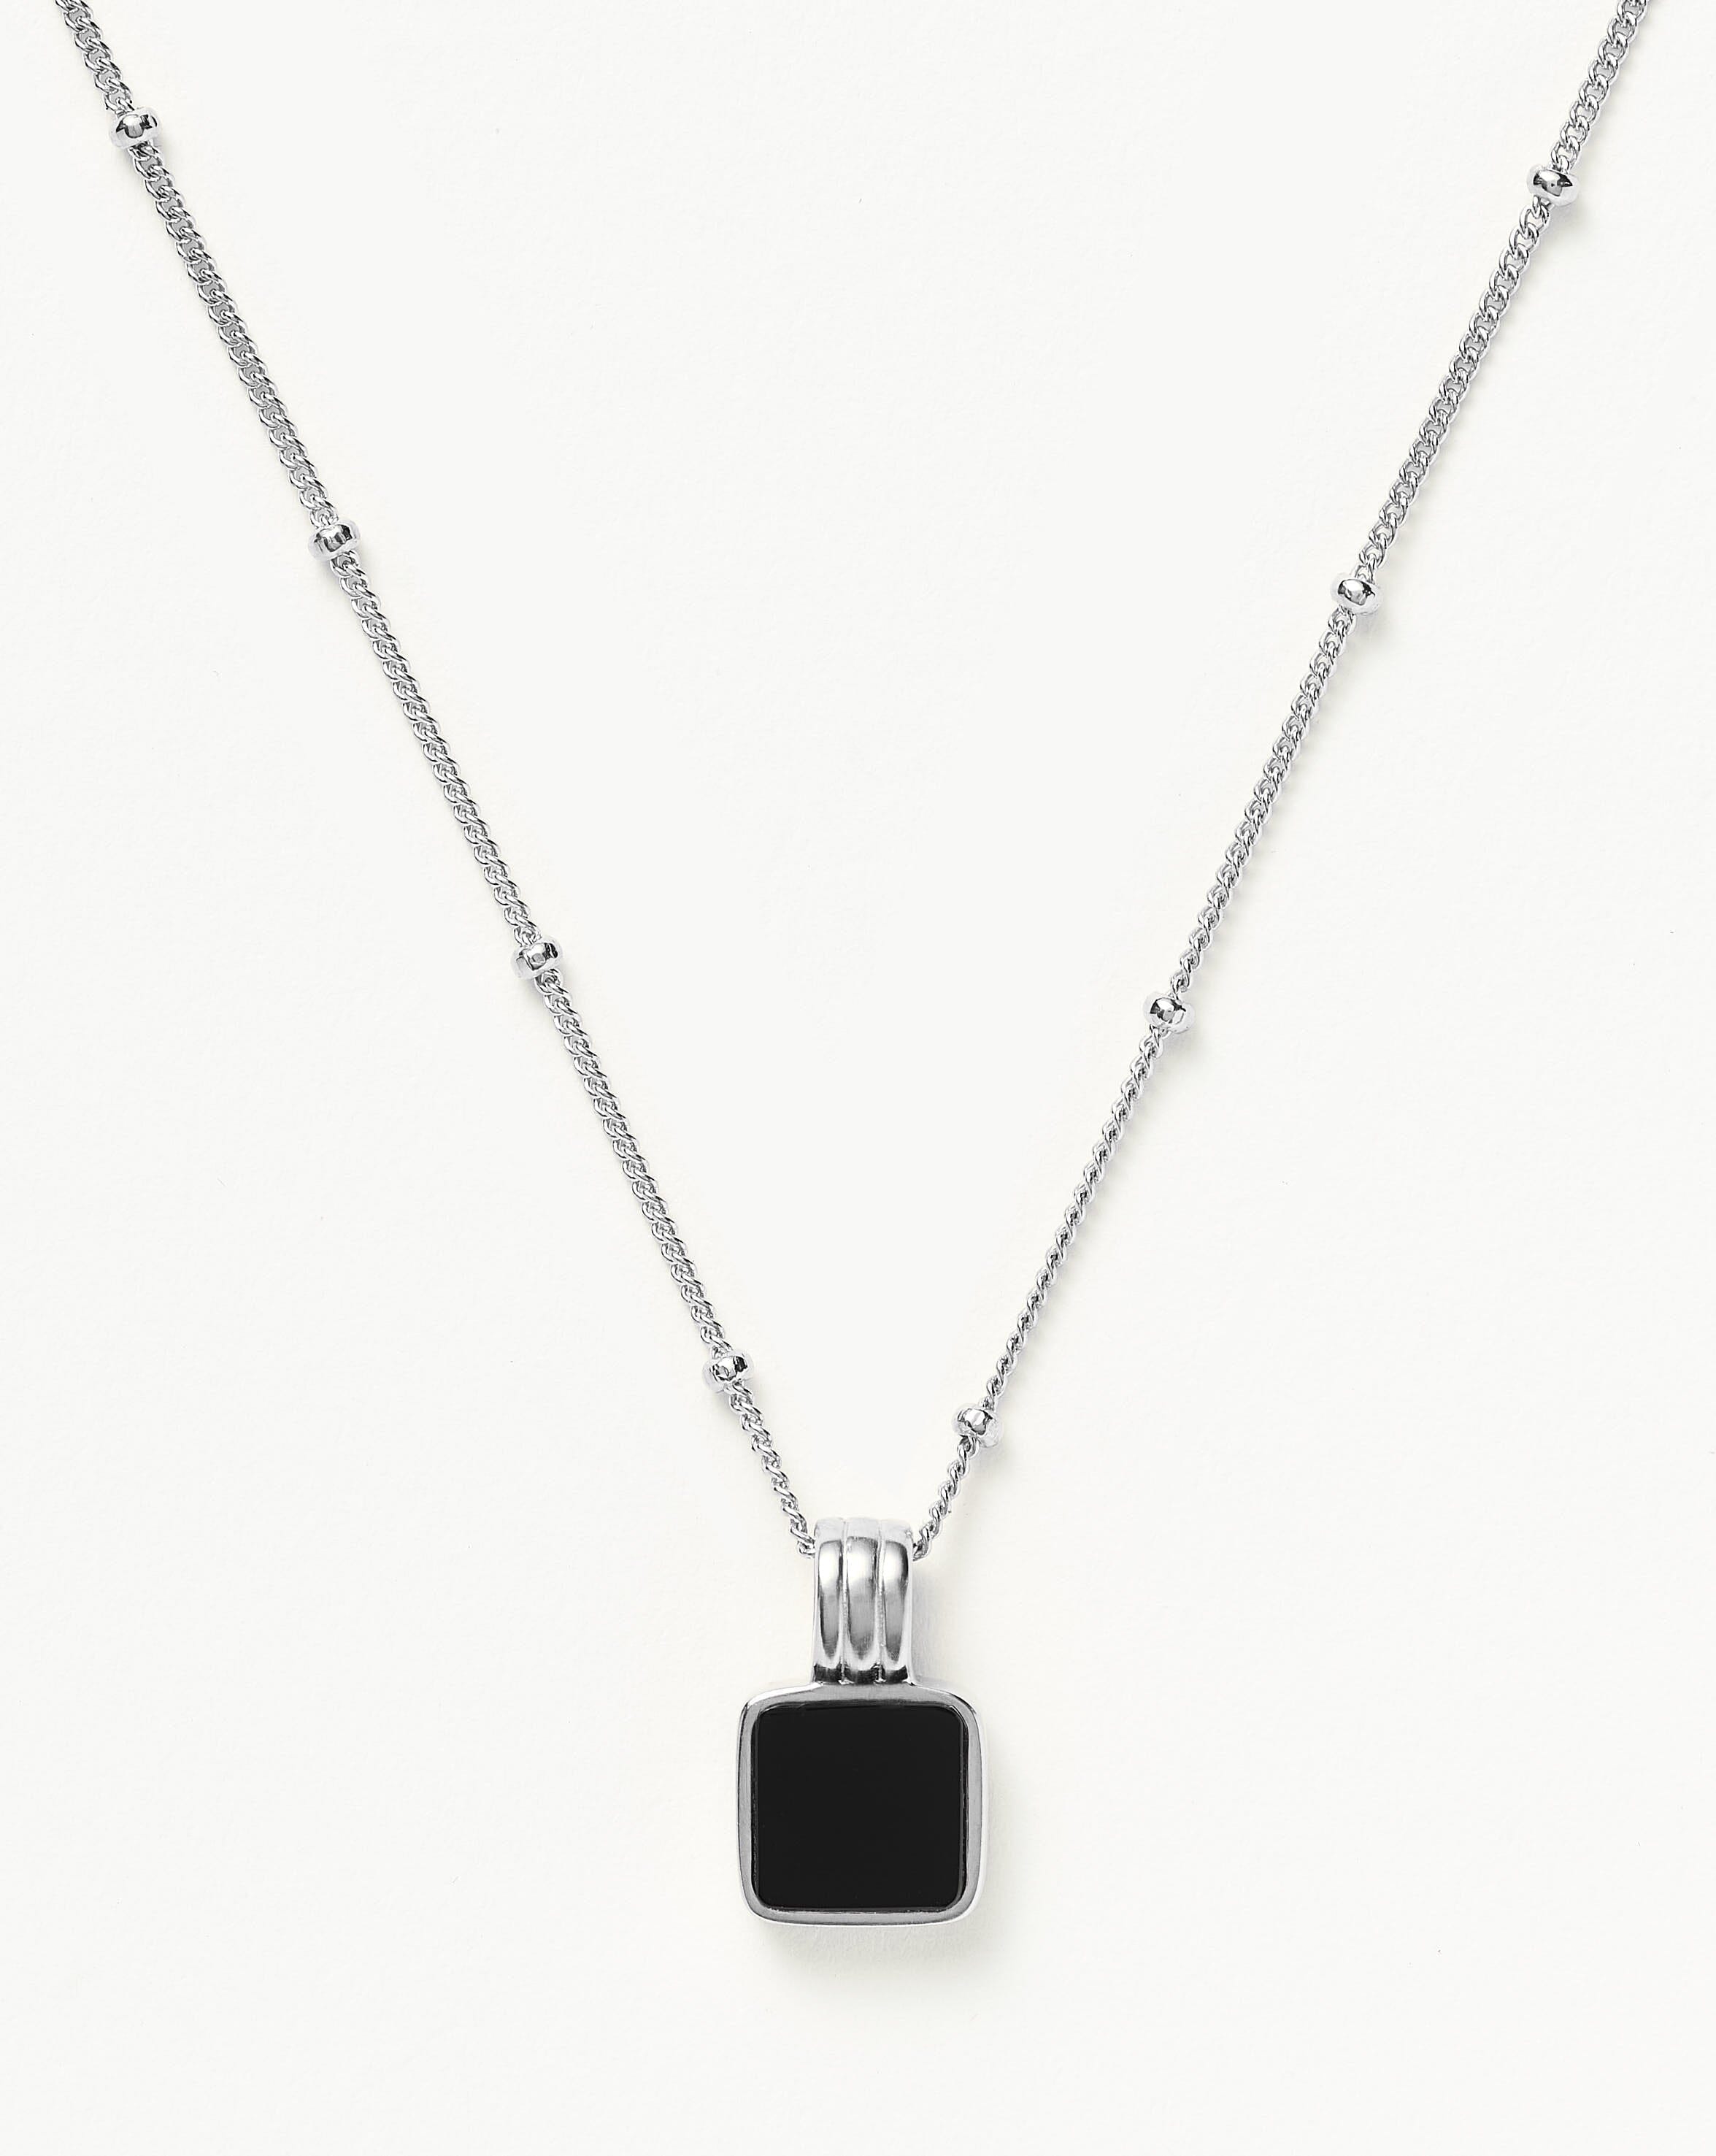 Lucy Williams Square Onyx Gemstone Necklace | Sterling Silver/Black Onyx Necklaces Missoma 